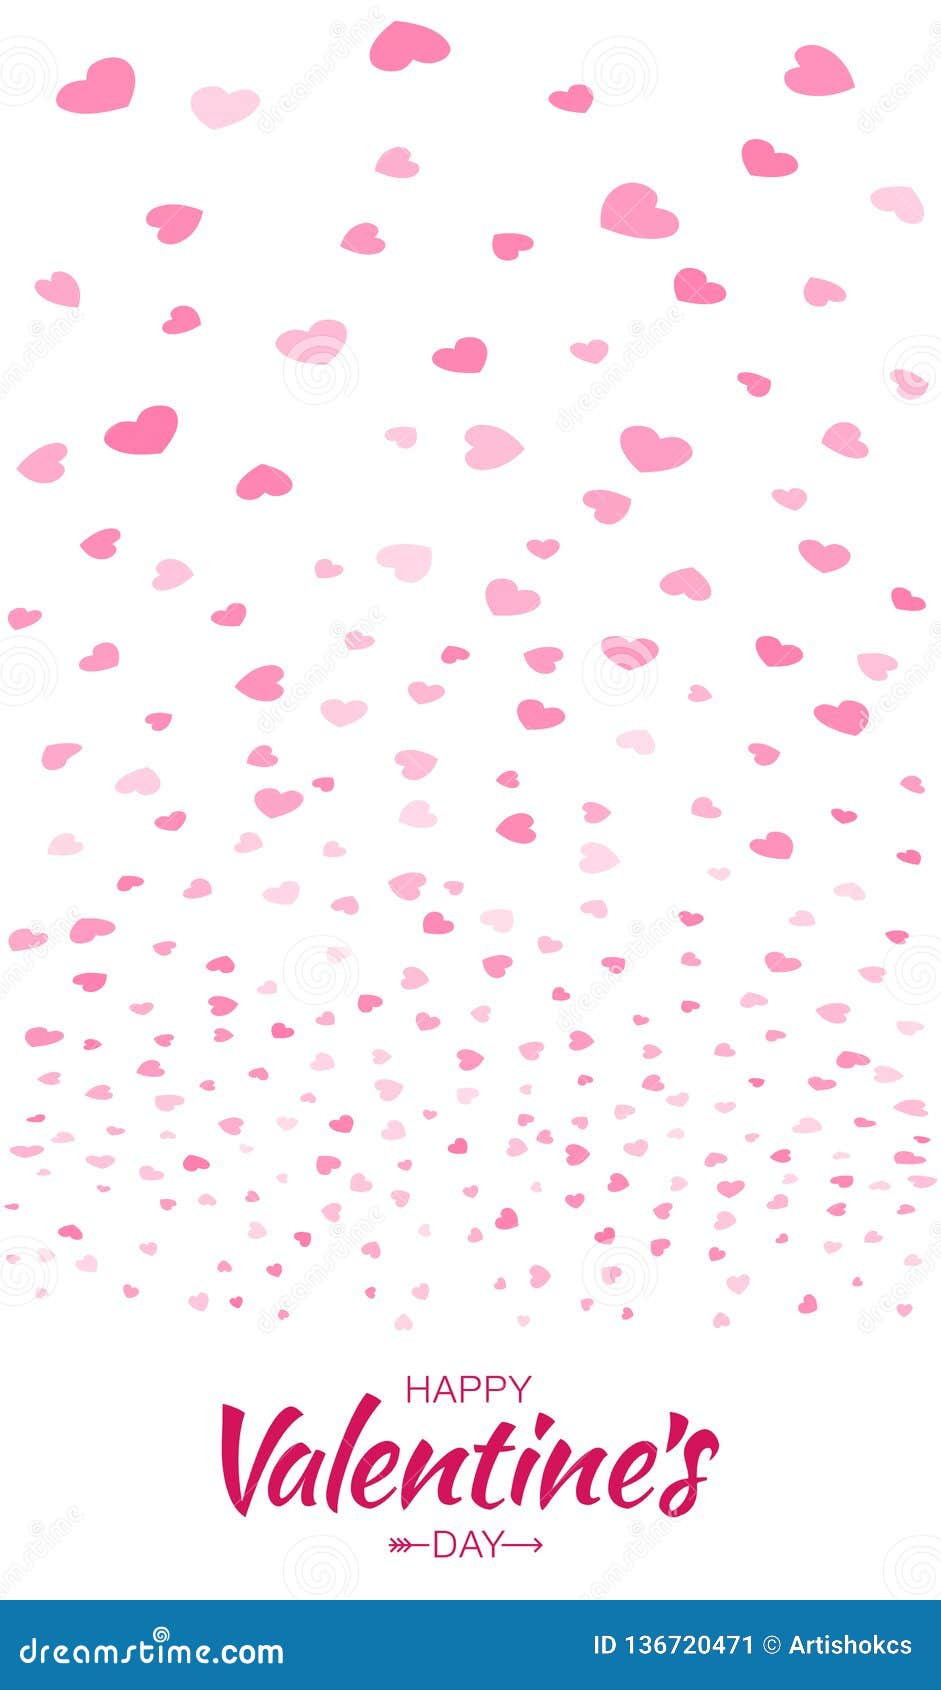 AOFOTO 10x10ft Valentines Day Backdrop Pink Hearts Striped Background Sweet Heart Bridal Shower Party Wedding Photography Fantasy Couples Kids Photoshoot Banner Portrait Photo Studio Props Vinyl 